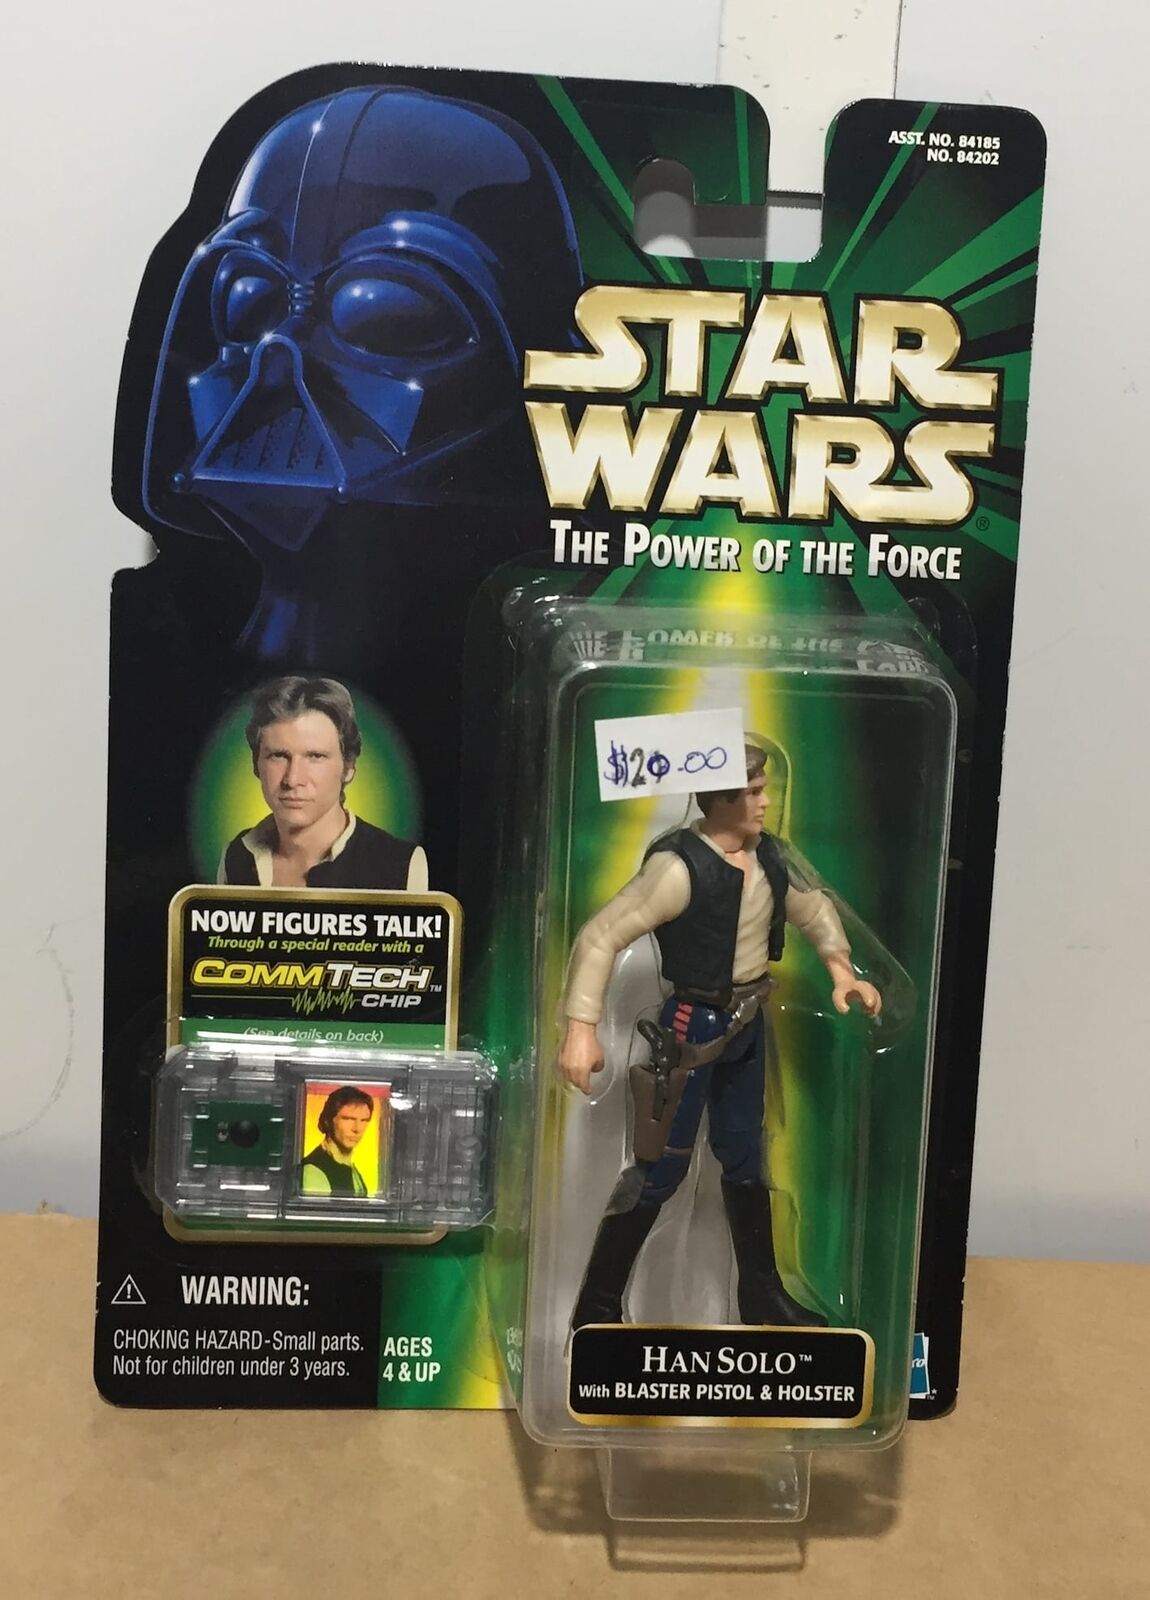 STAR WARS - HASBRO - POTF - HAN SOLO - with Blaster Pistol, Holster and Commtech Chip